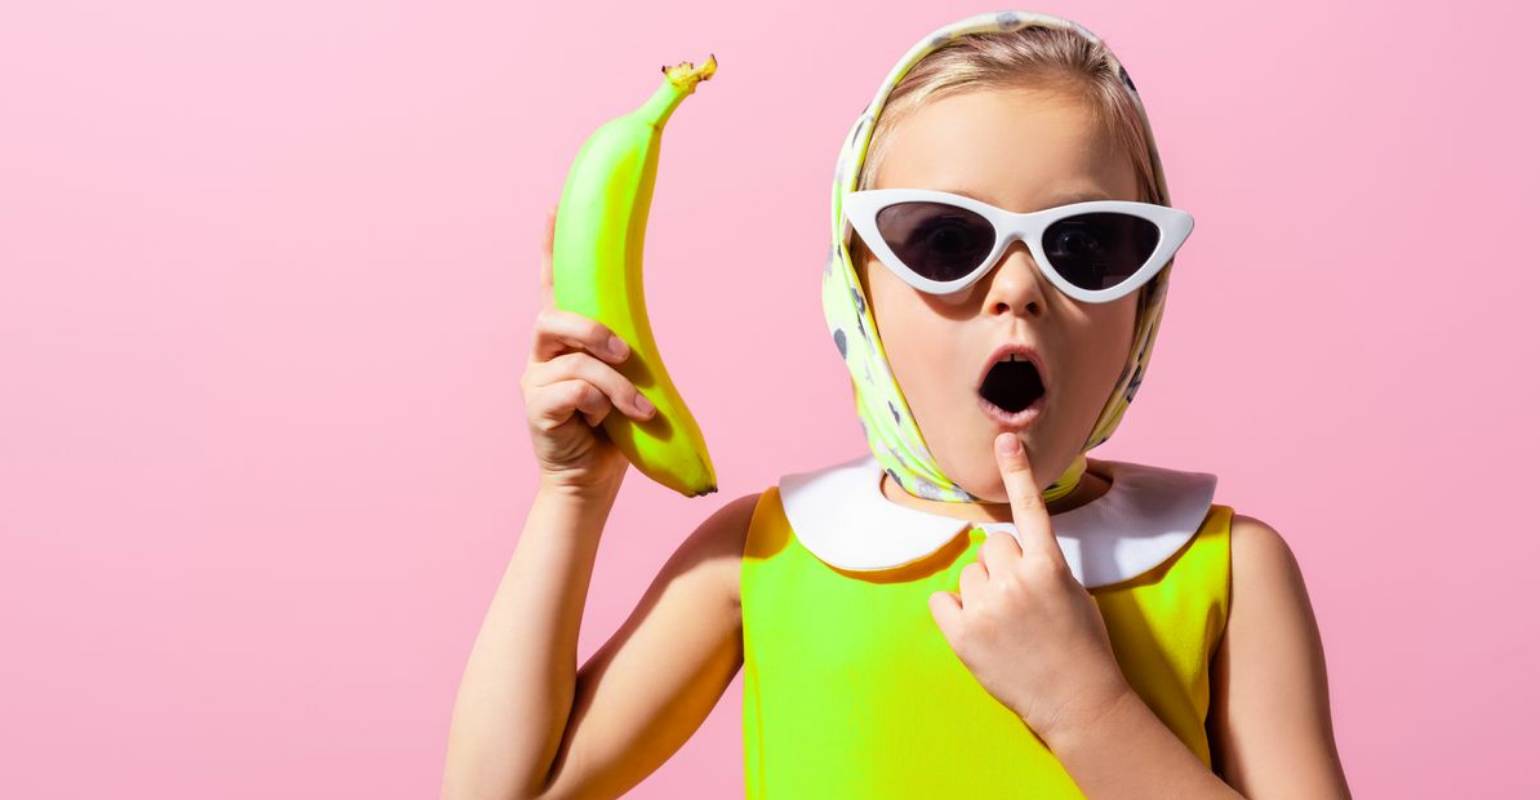 A kid in green outfit holding a banana